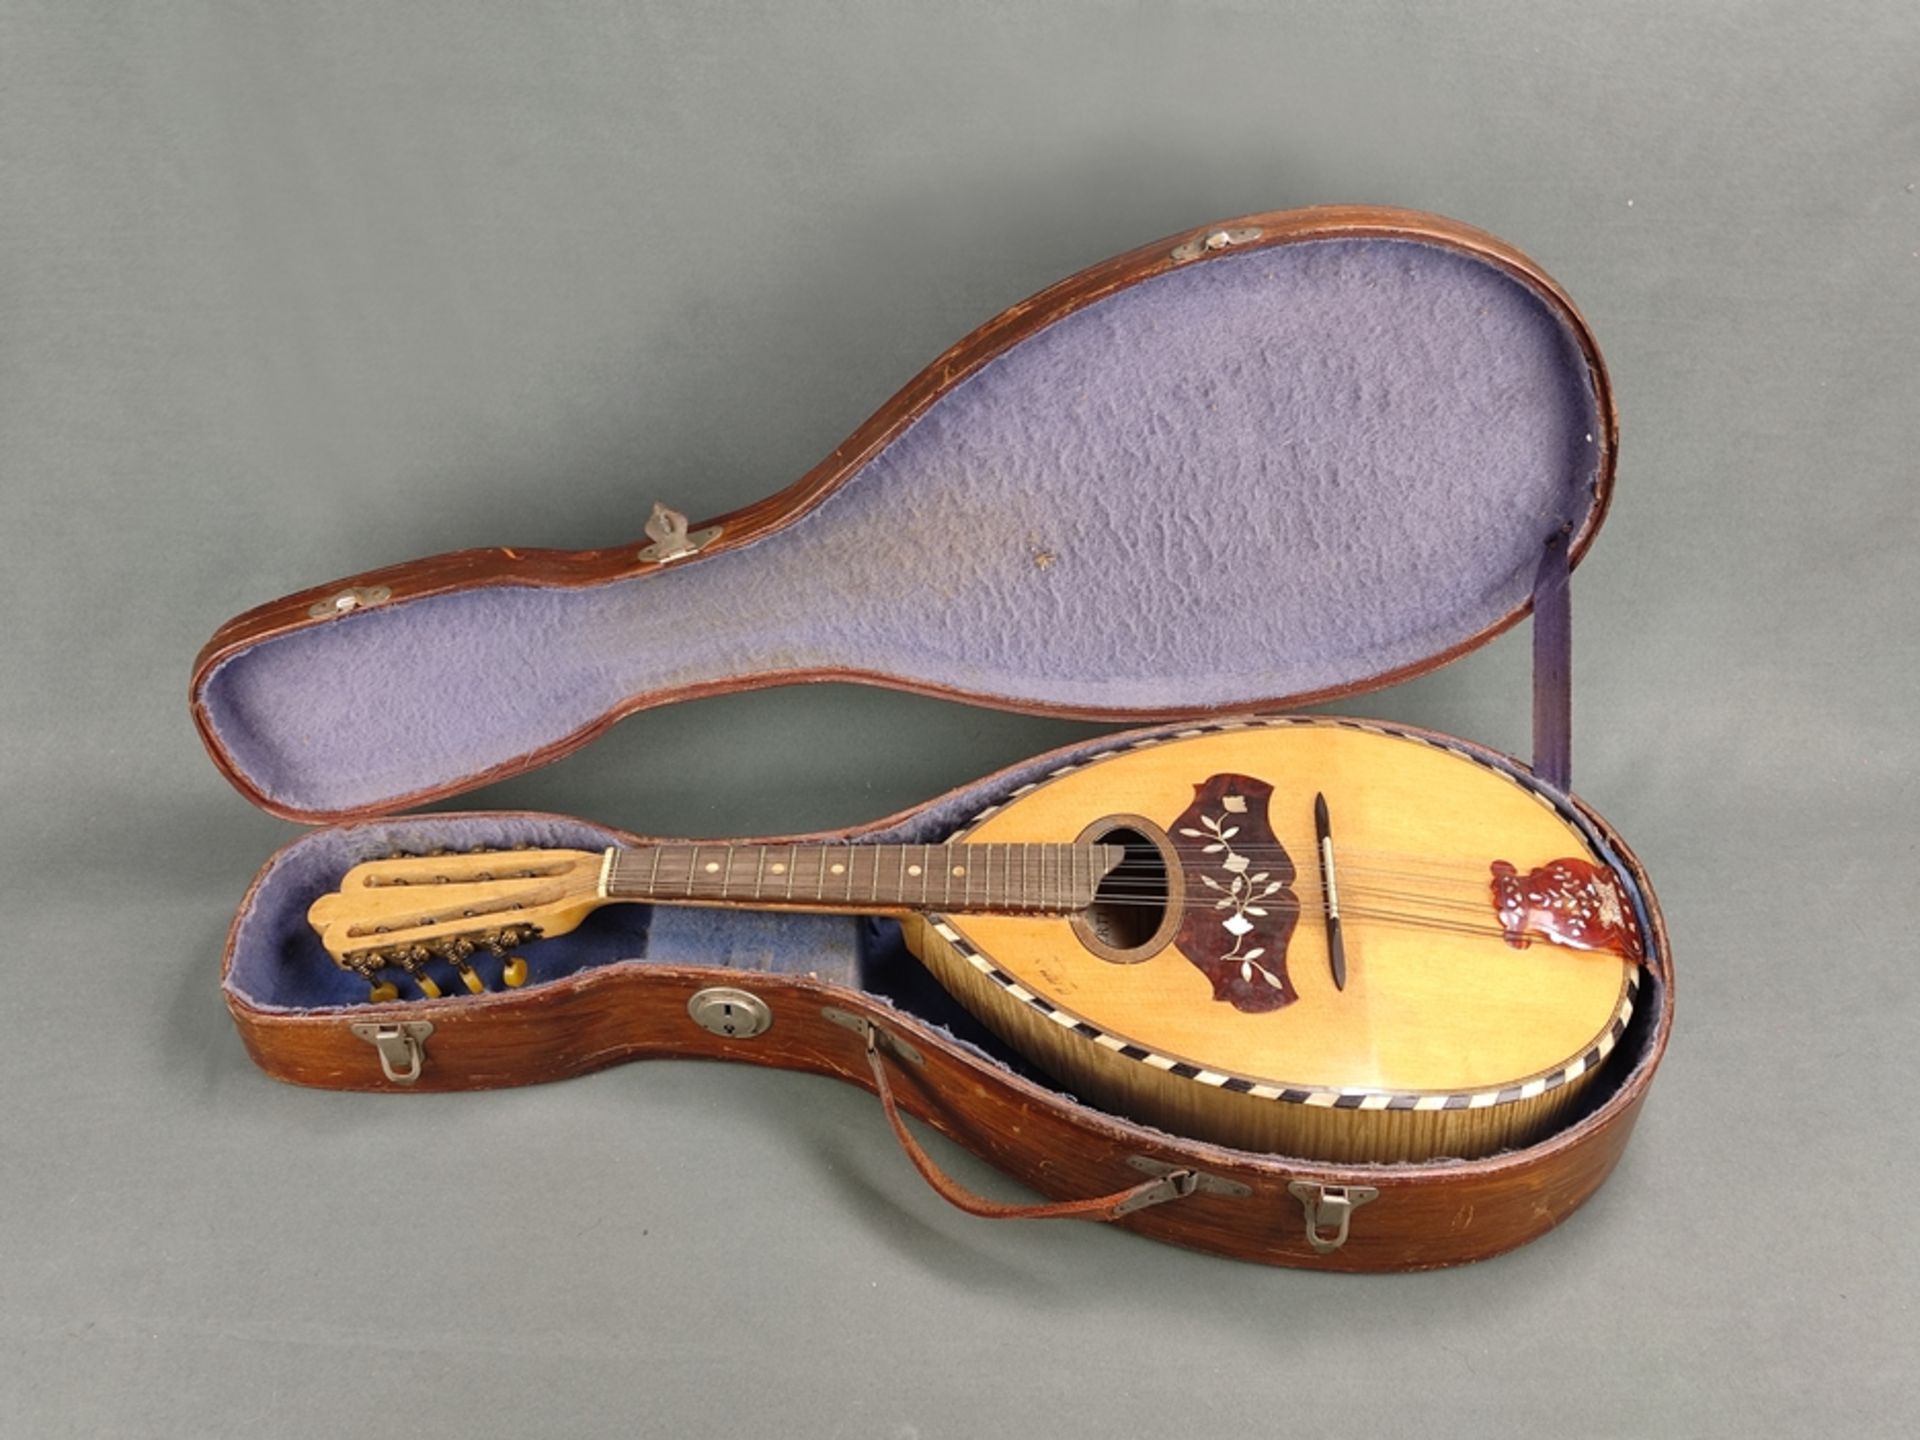 Mandolin, Italy, Naples, first half of 19th century, signed Alberto Alberti, maple wood and mother-